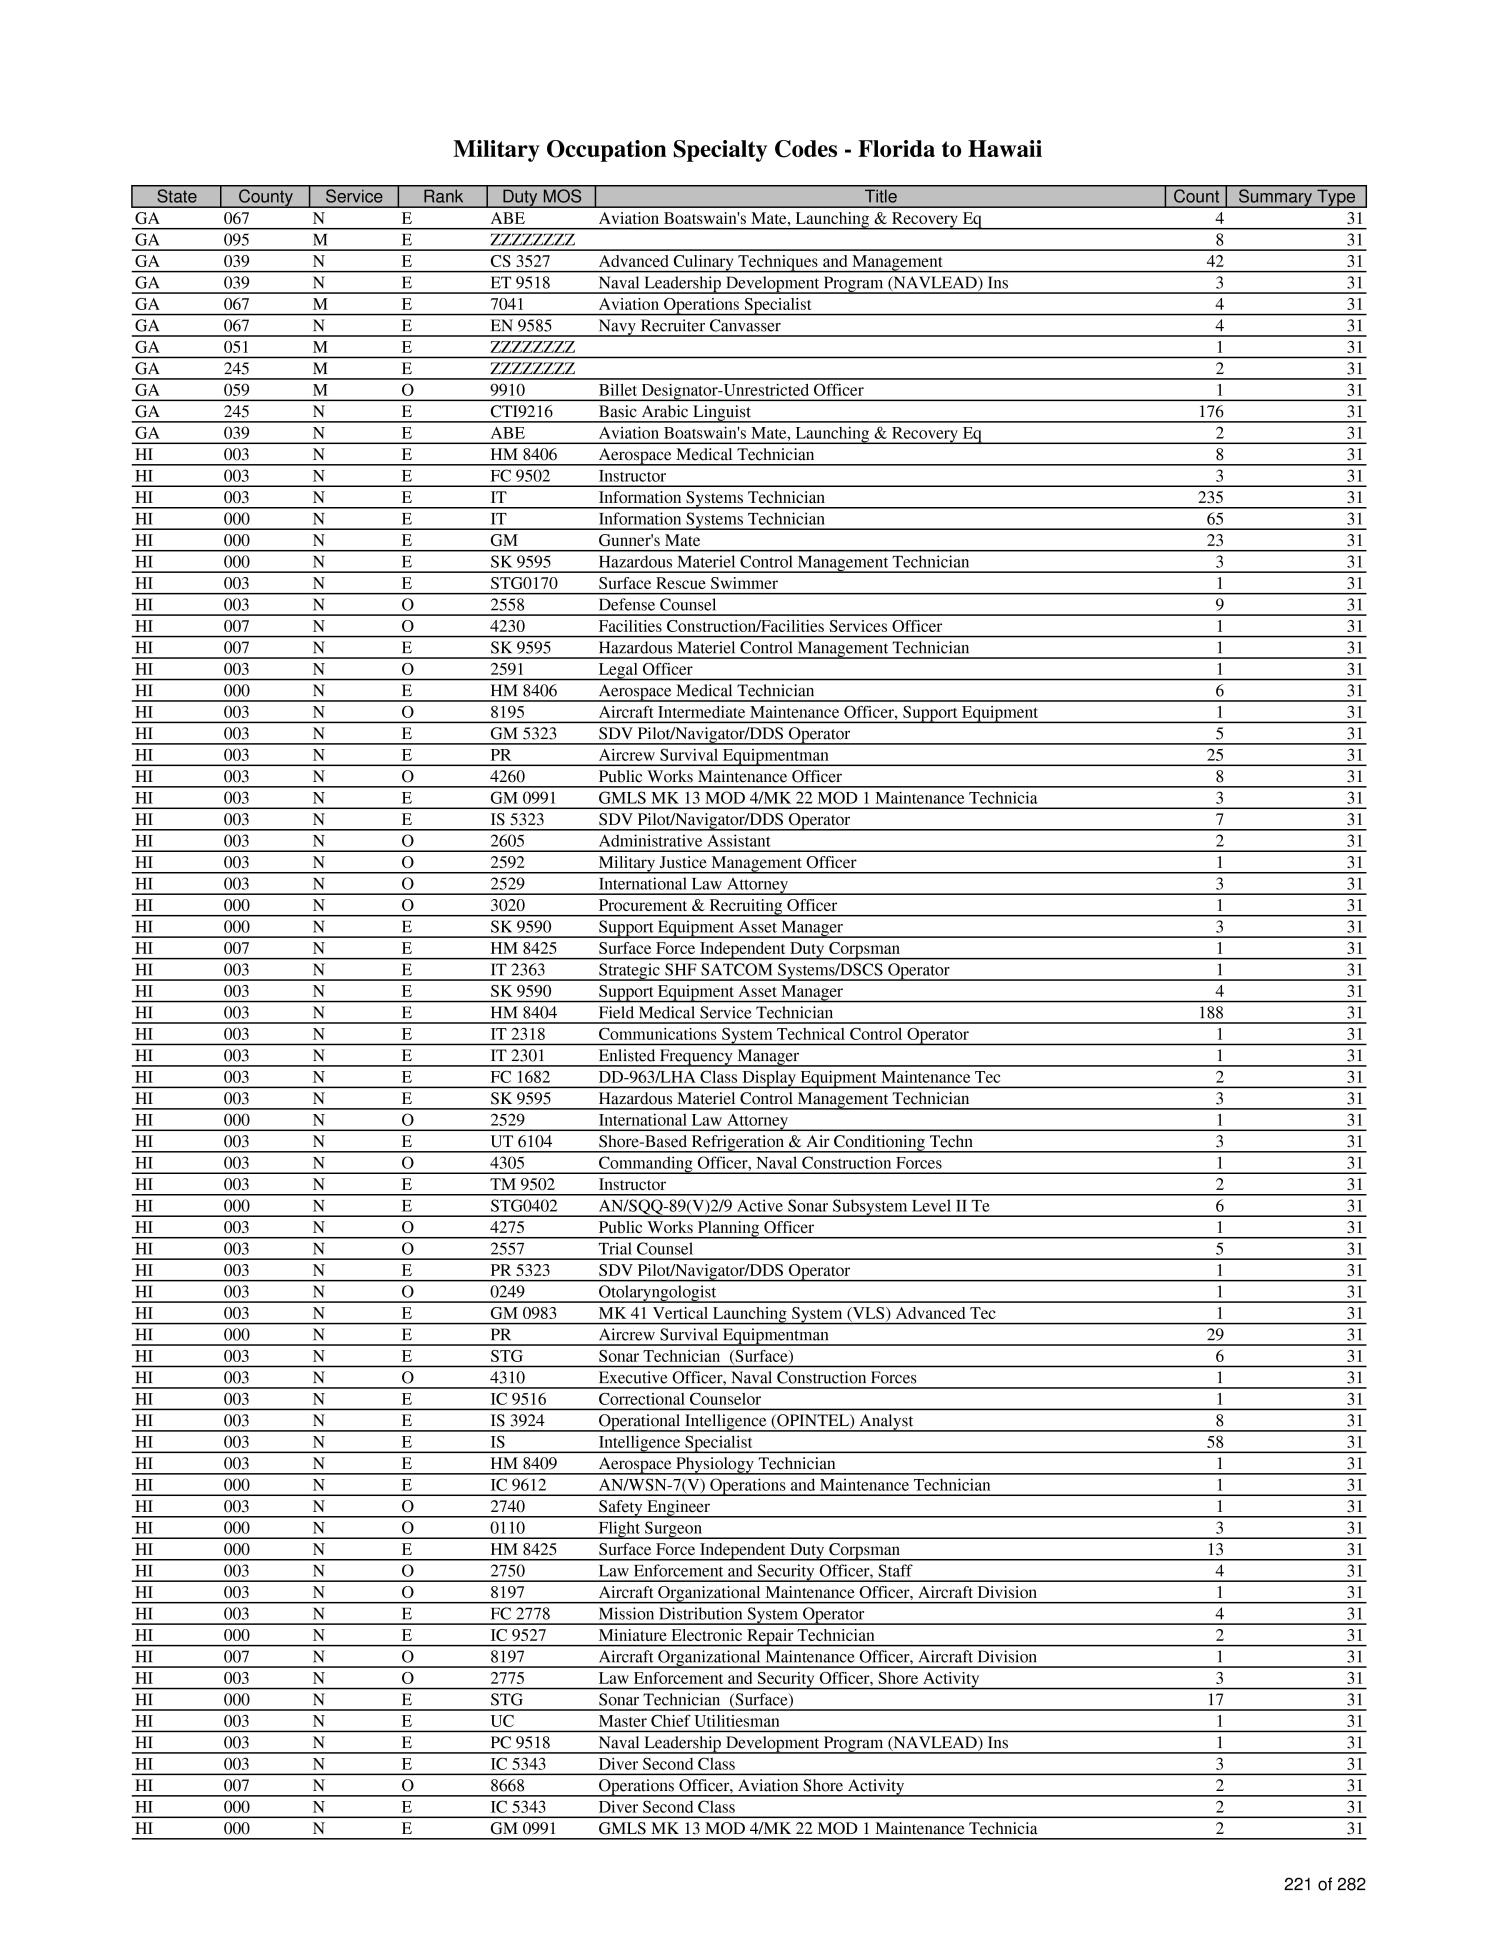 list-of-military-occupation-specialty-codes-mos-by-state-and-county-page-813-of-1-684-unt